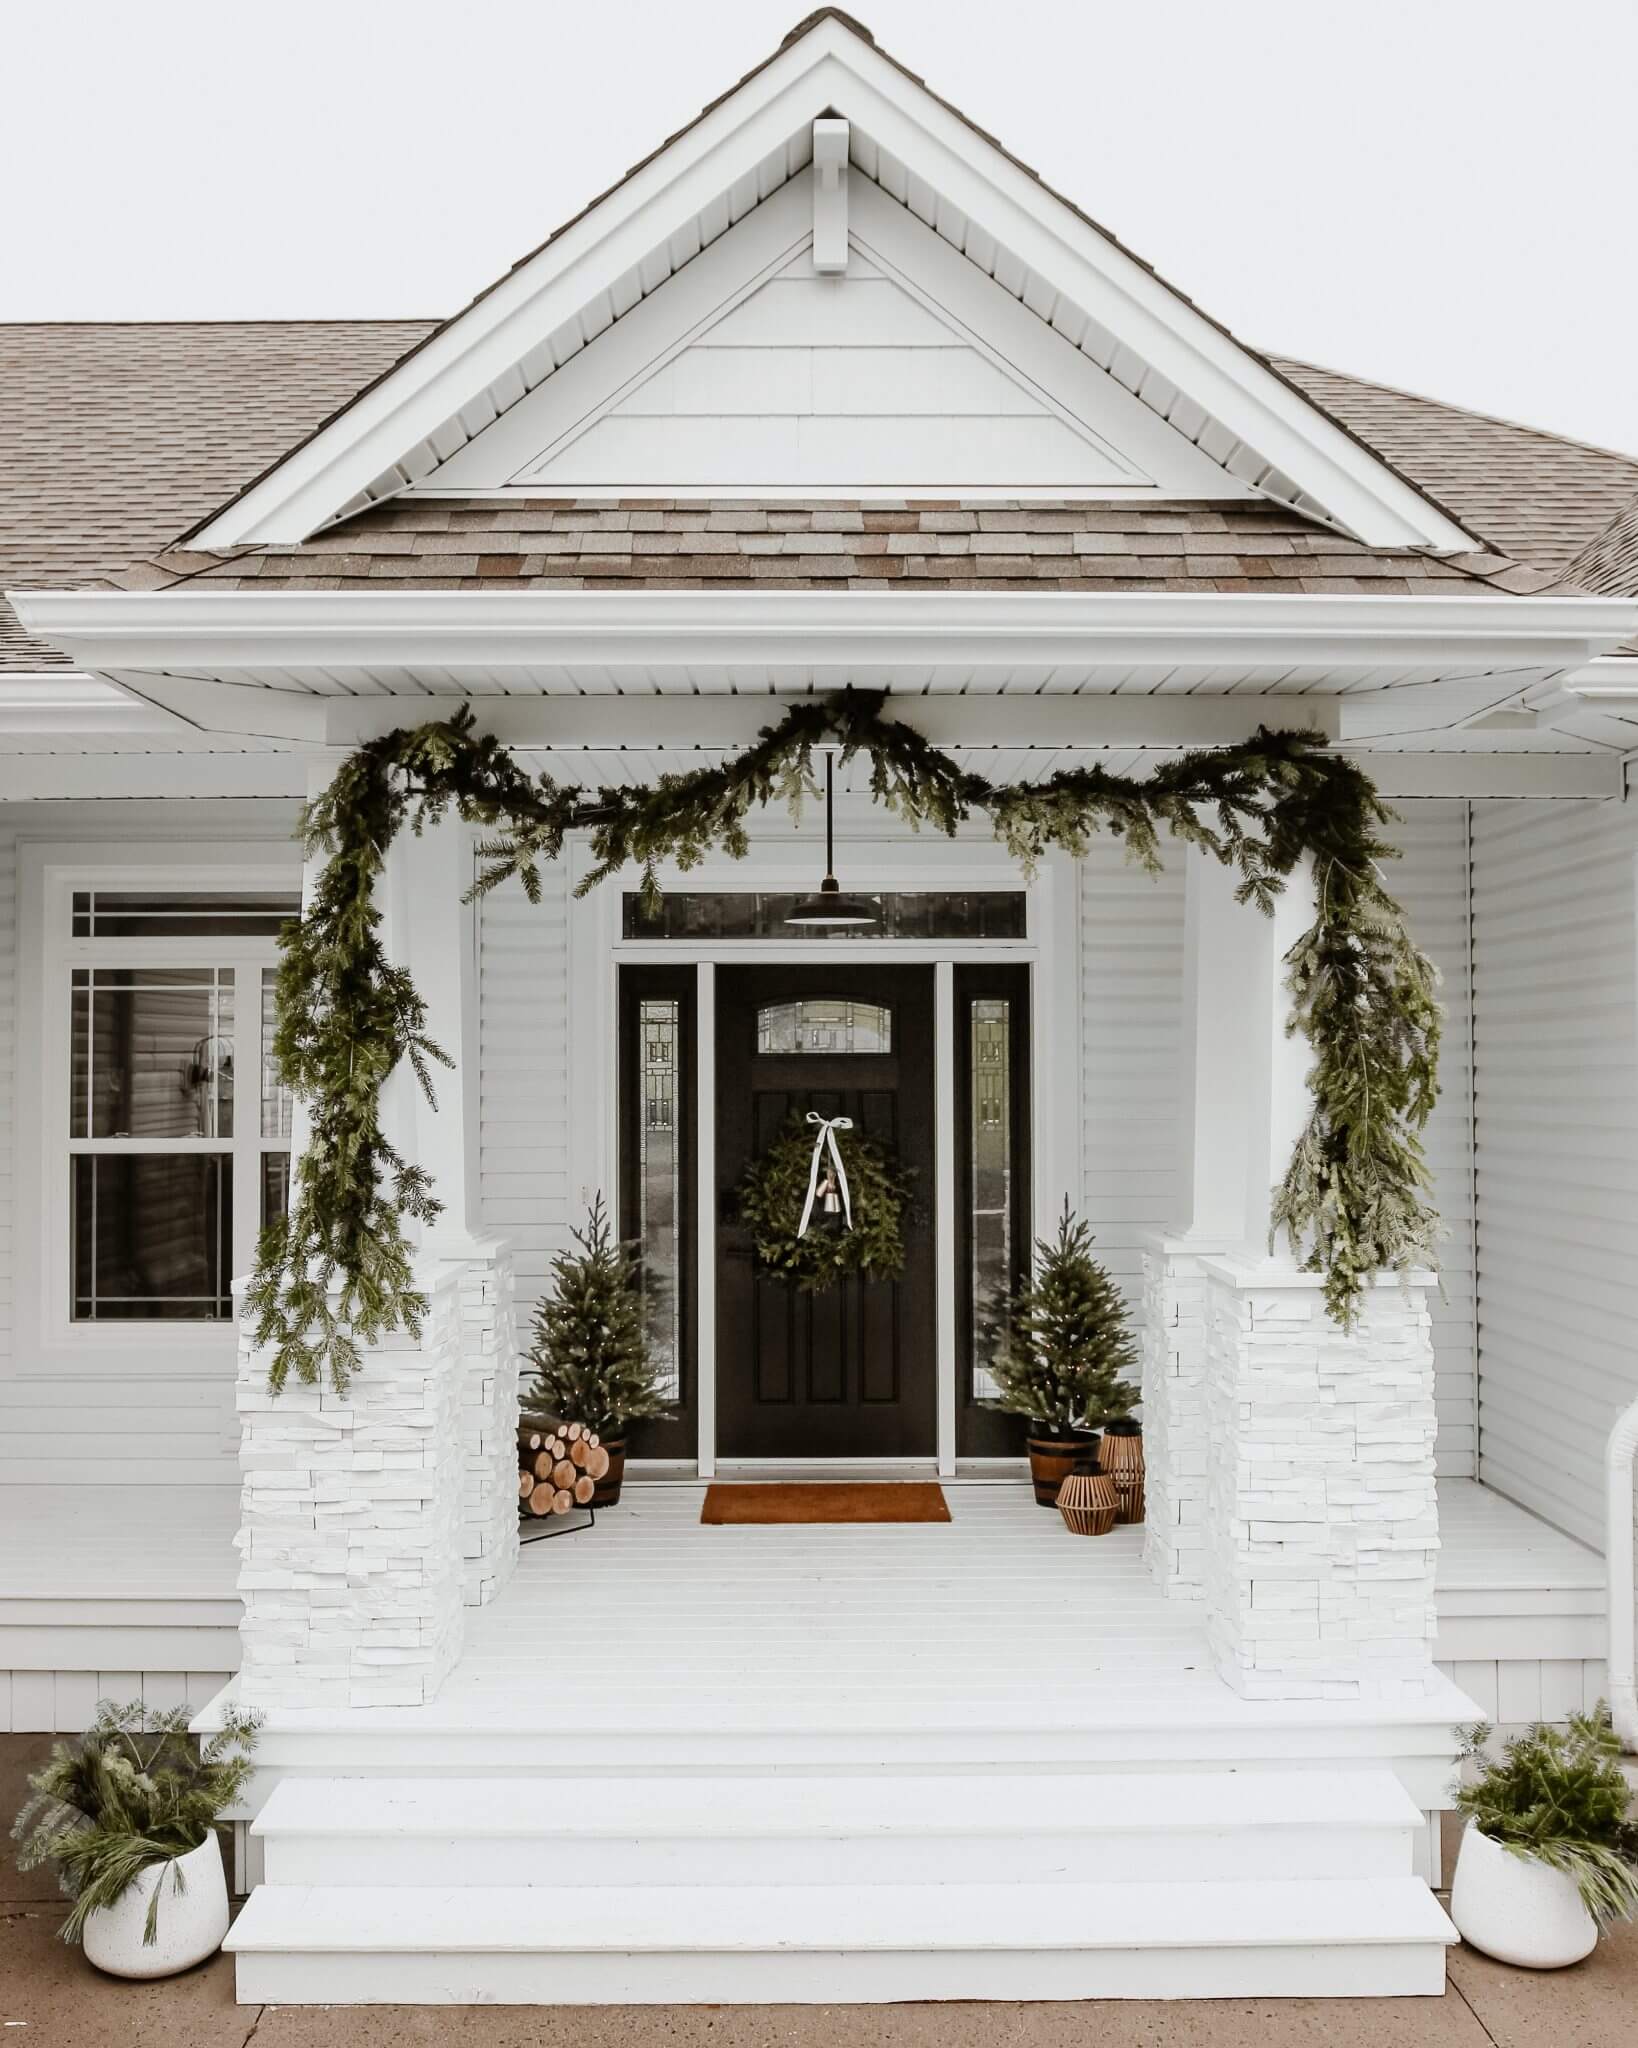 Looking for gorgeous Christmas front porch decor ideas? I have over 100 Christmas porch decor ideas perfect for ny style. Add as much as you love.